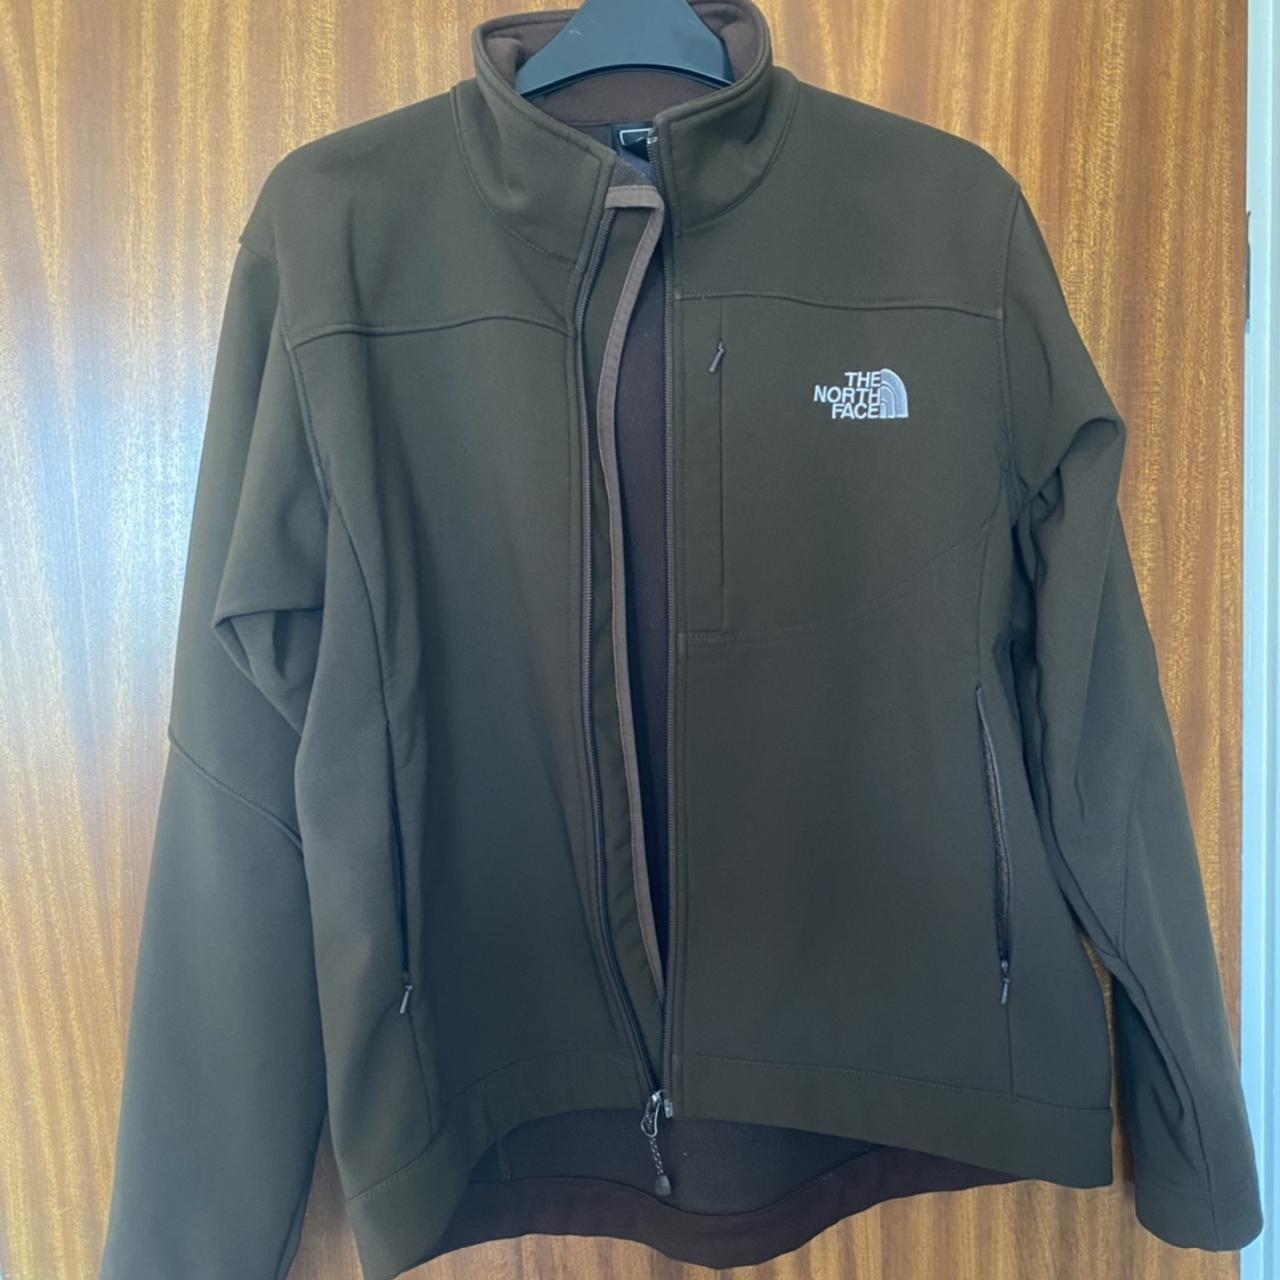 The North Face Apex Jacket - Women’s Size... - Depop